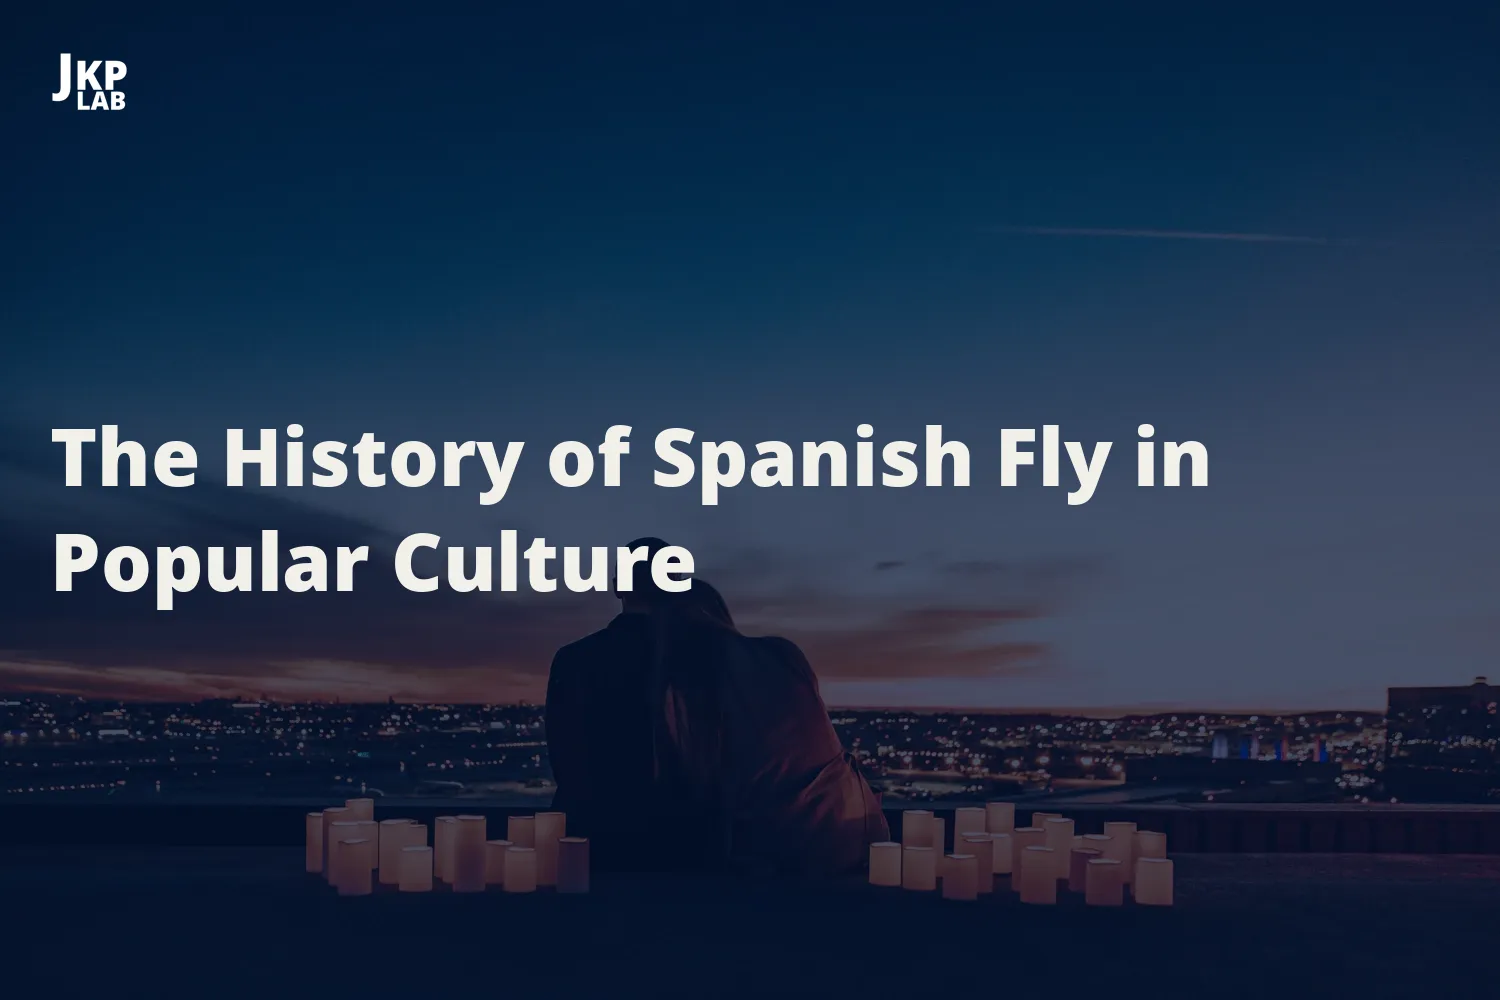 The Popularity of Spanish Fly in Media and Literature